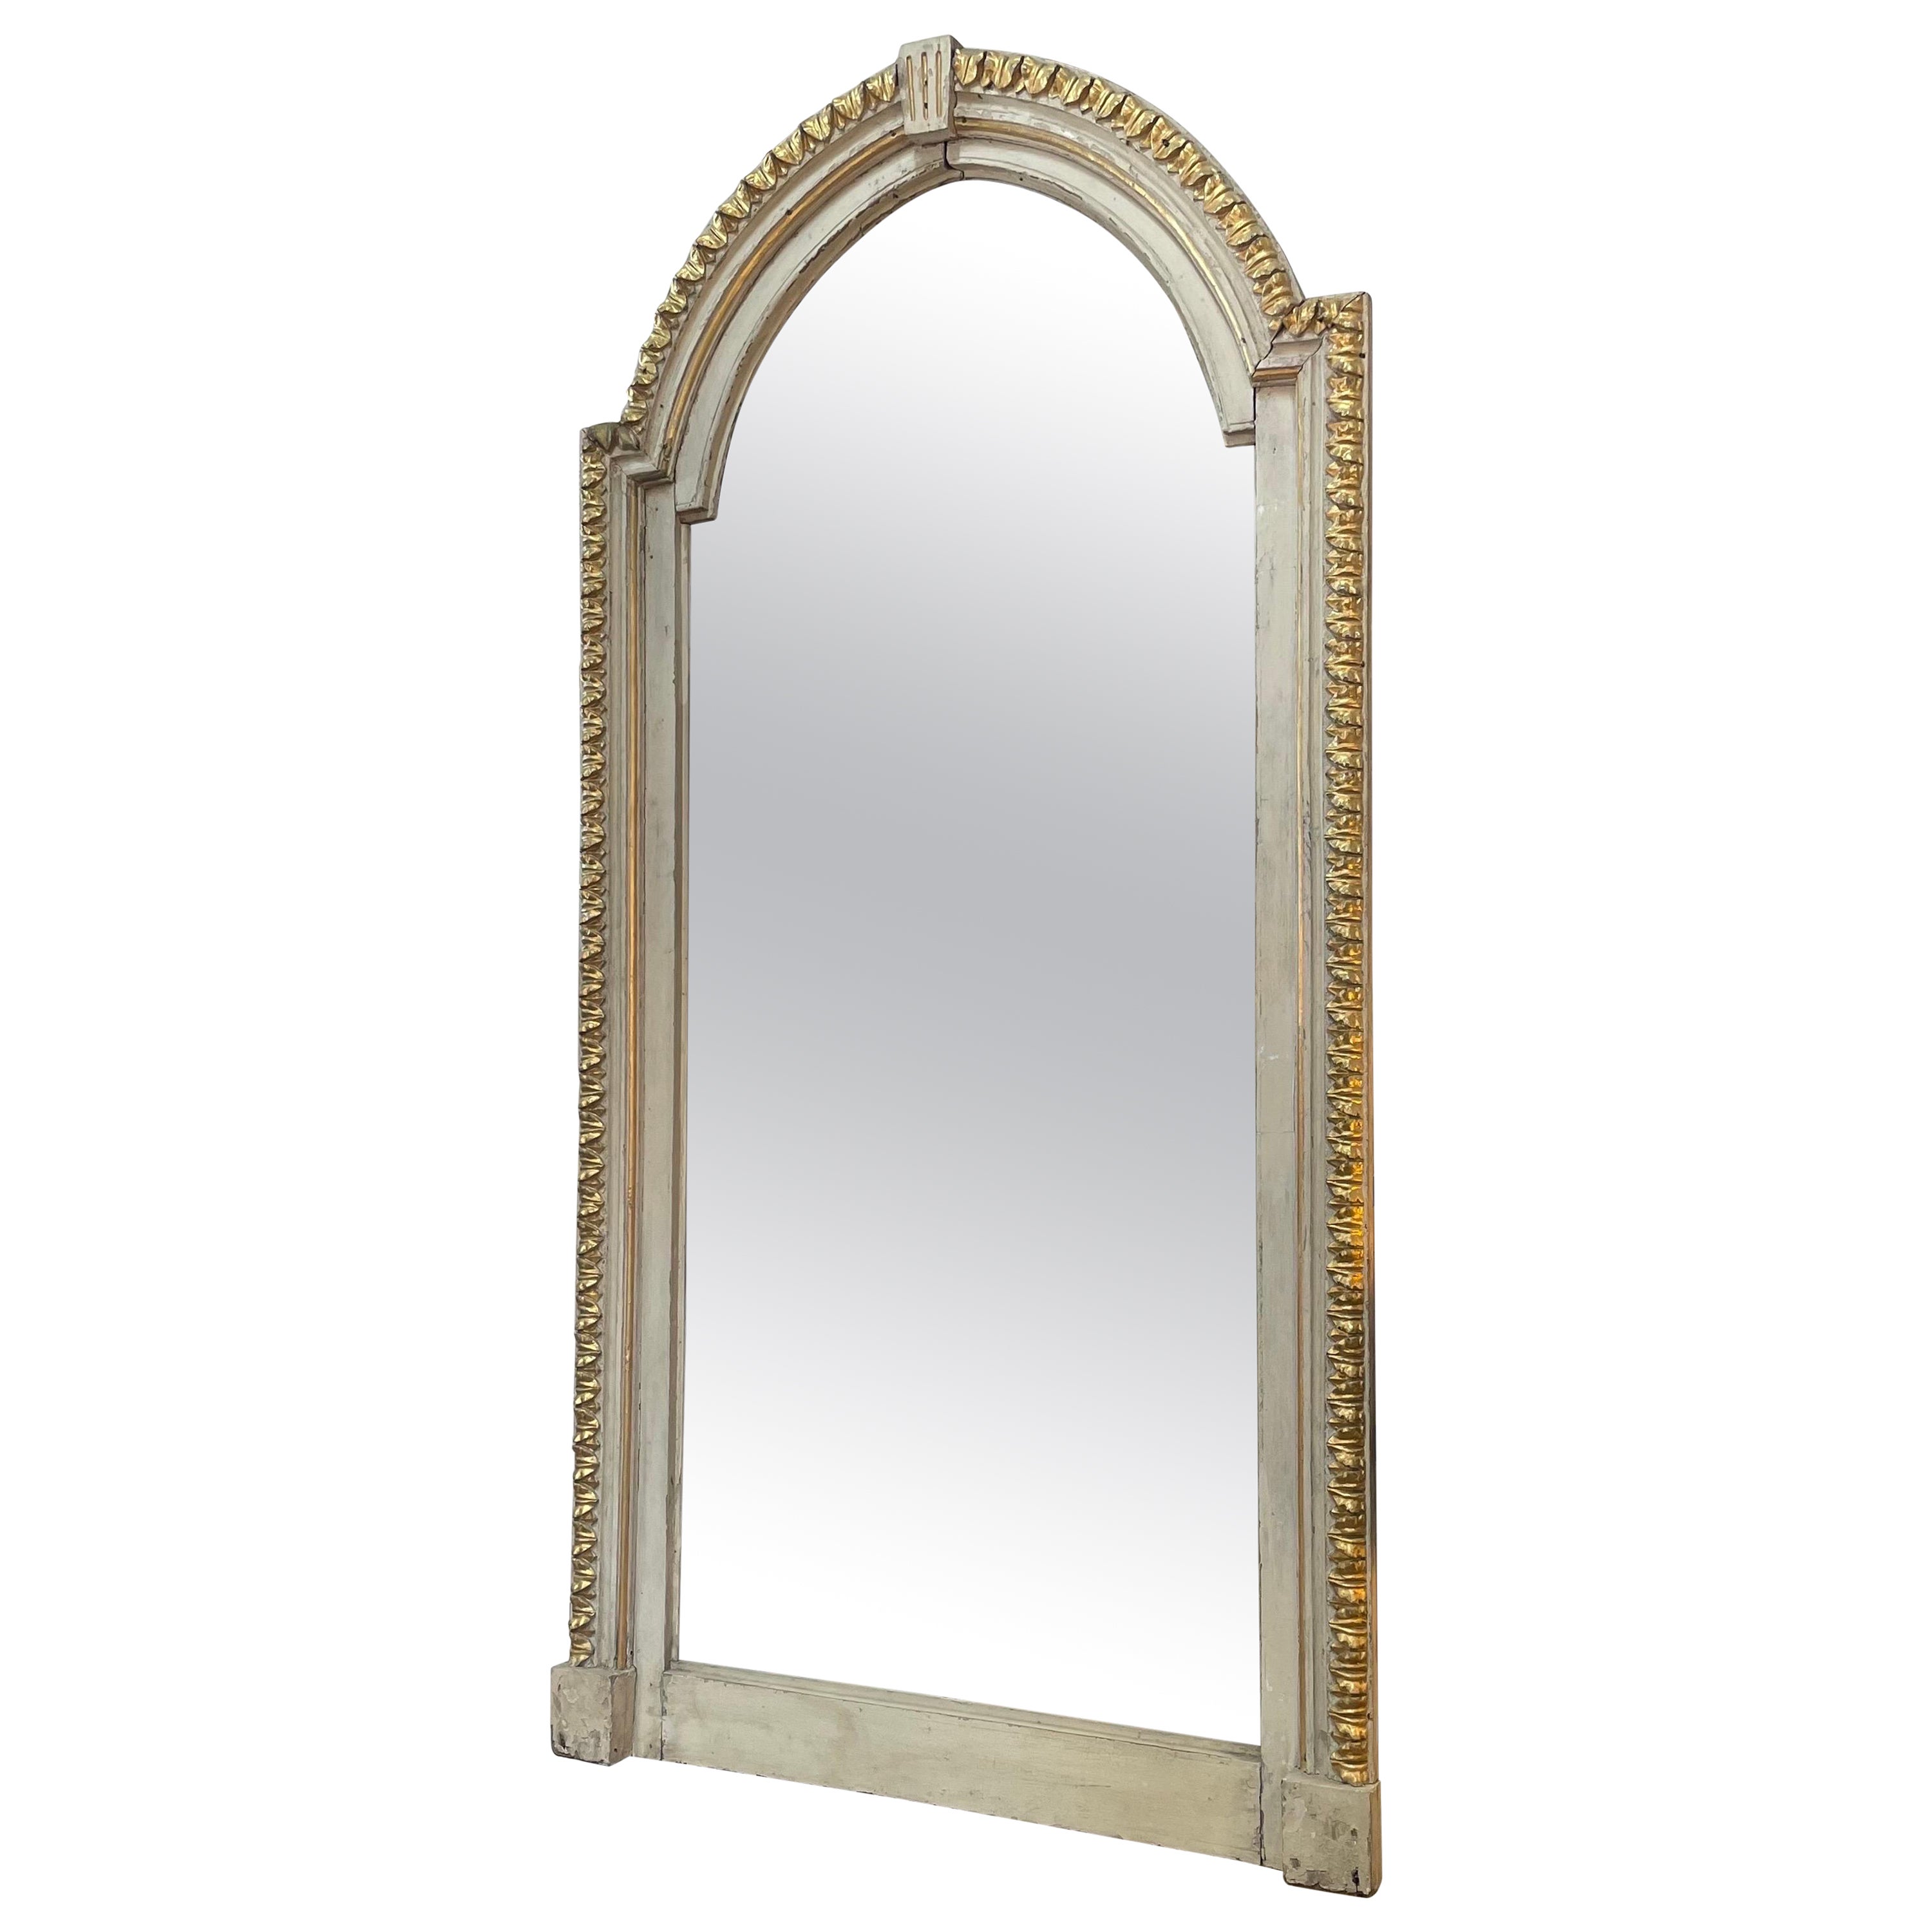 18th Century Portuguese Painted White and Gold Gilt Mirror For Sale